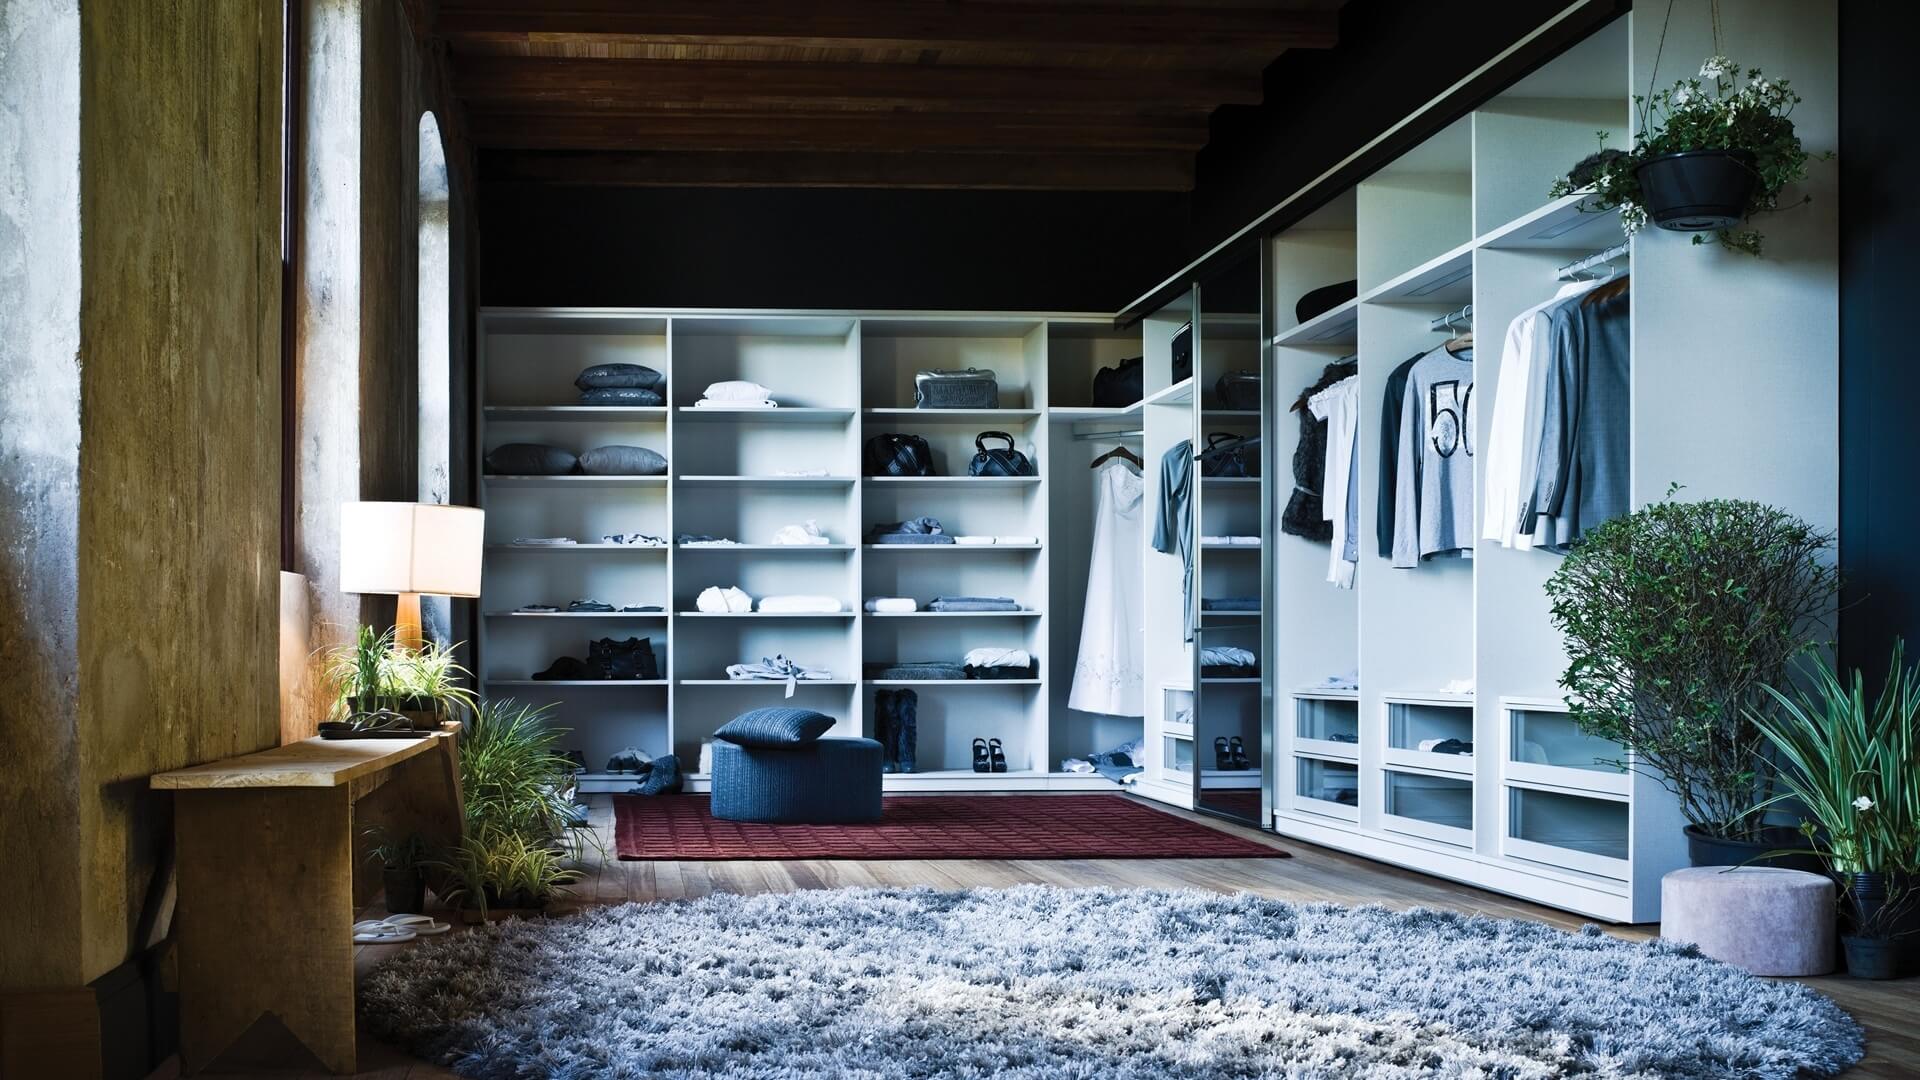 A spacious, elegant closet space with dark accents